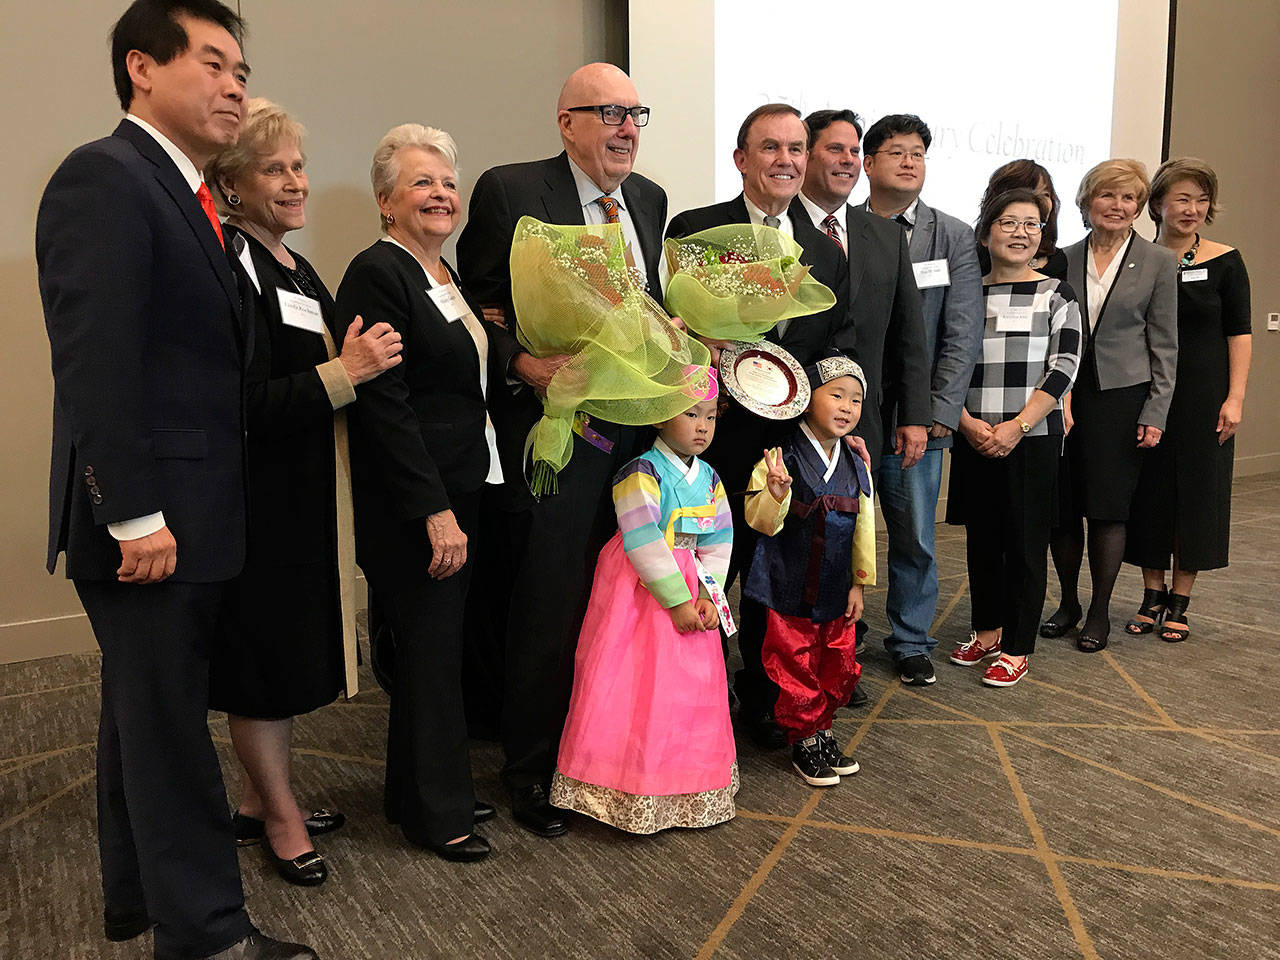 Federal Way’s Korean community celebrates 25 years of civic engagement